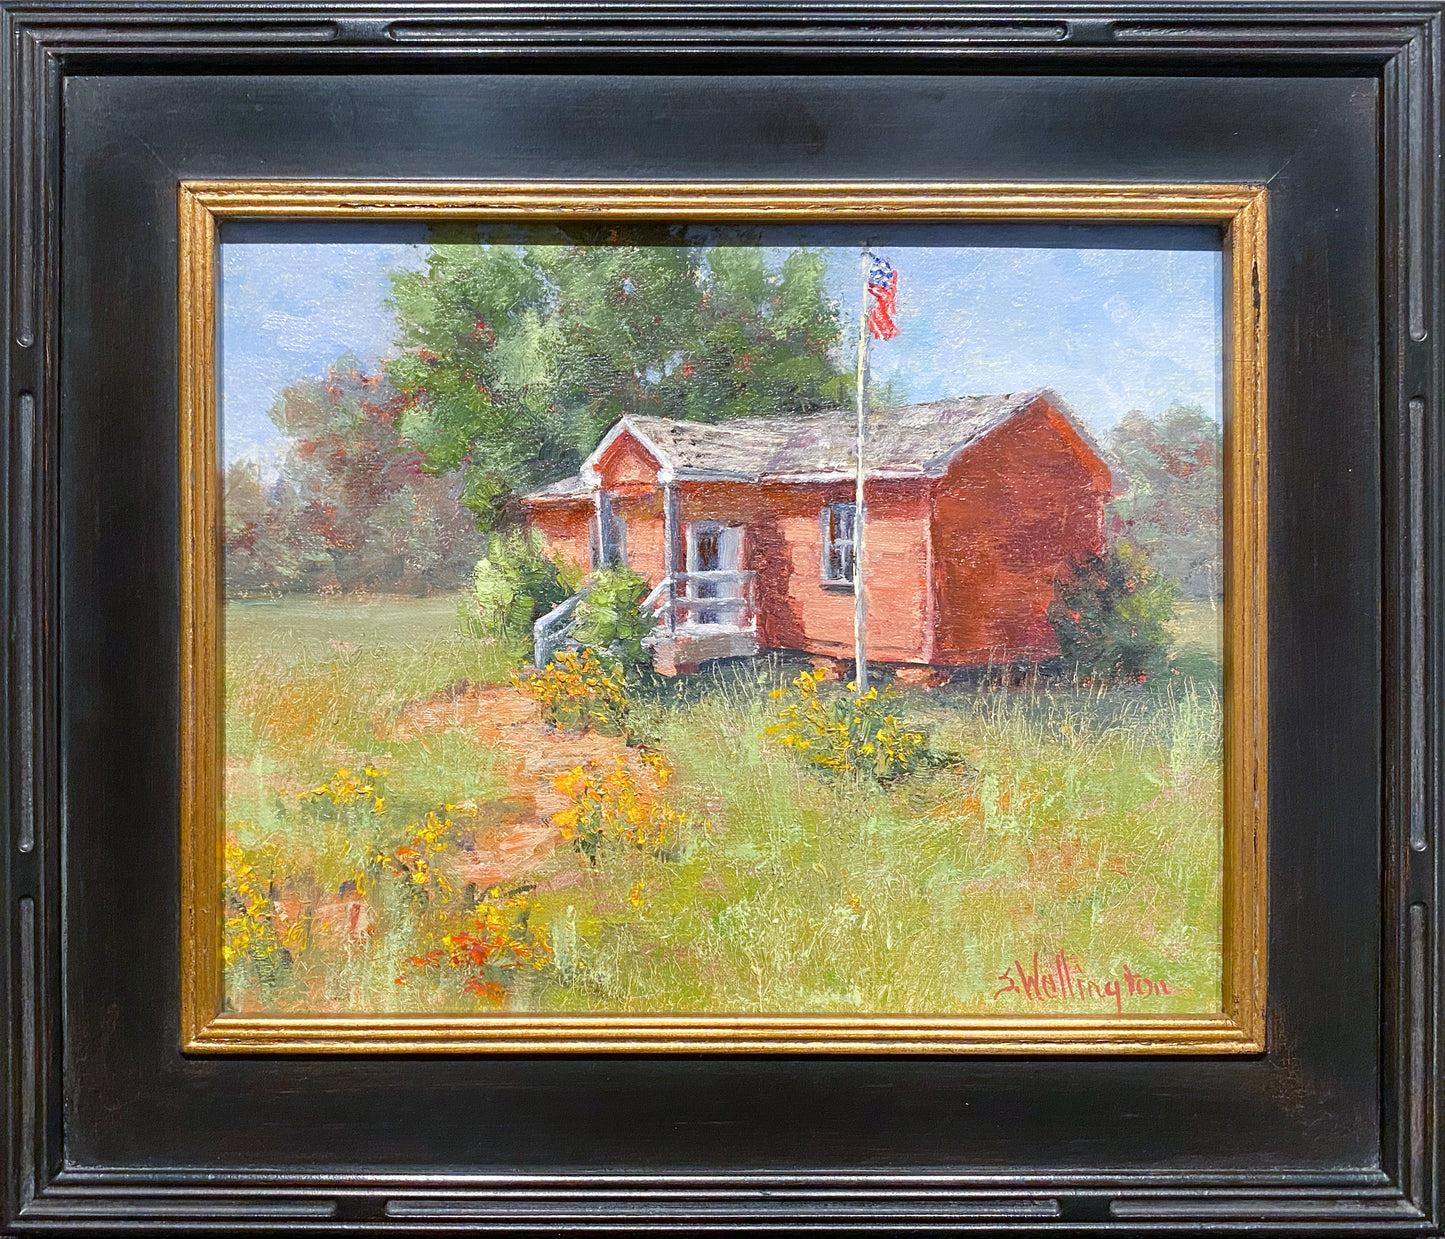 Little Red Schoolhouse